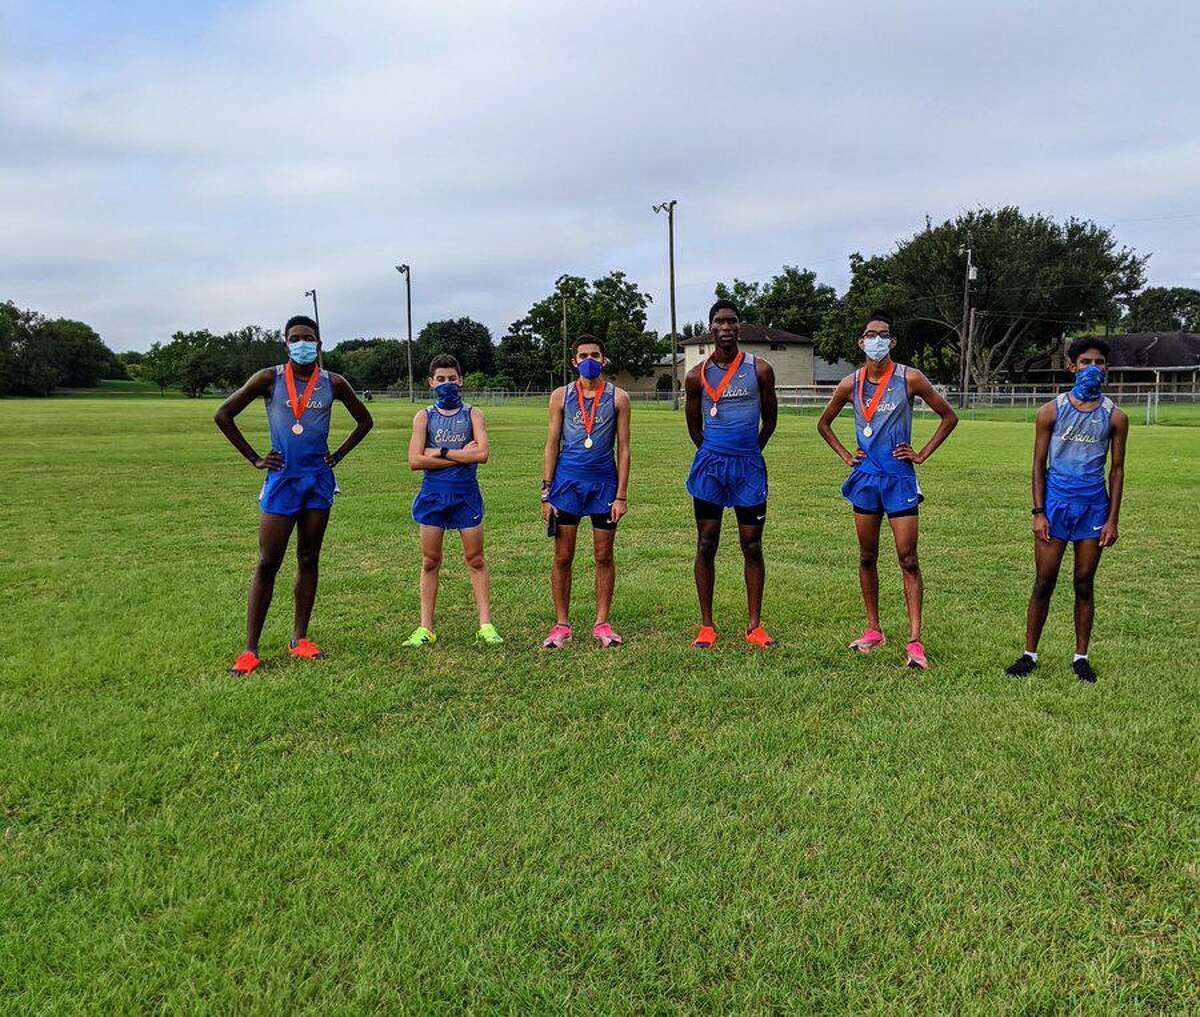 The Elkins boys cross country team won their division at the La Porte Bulldog Invitational, scoring only 23 points to lead a six-team race.